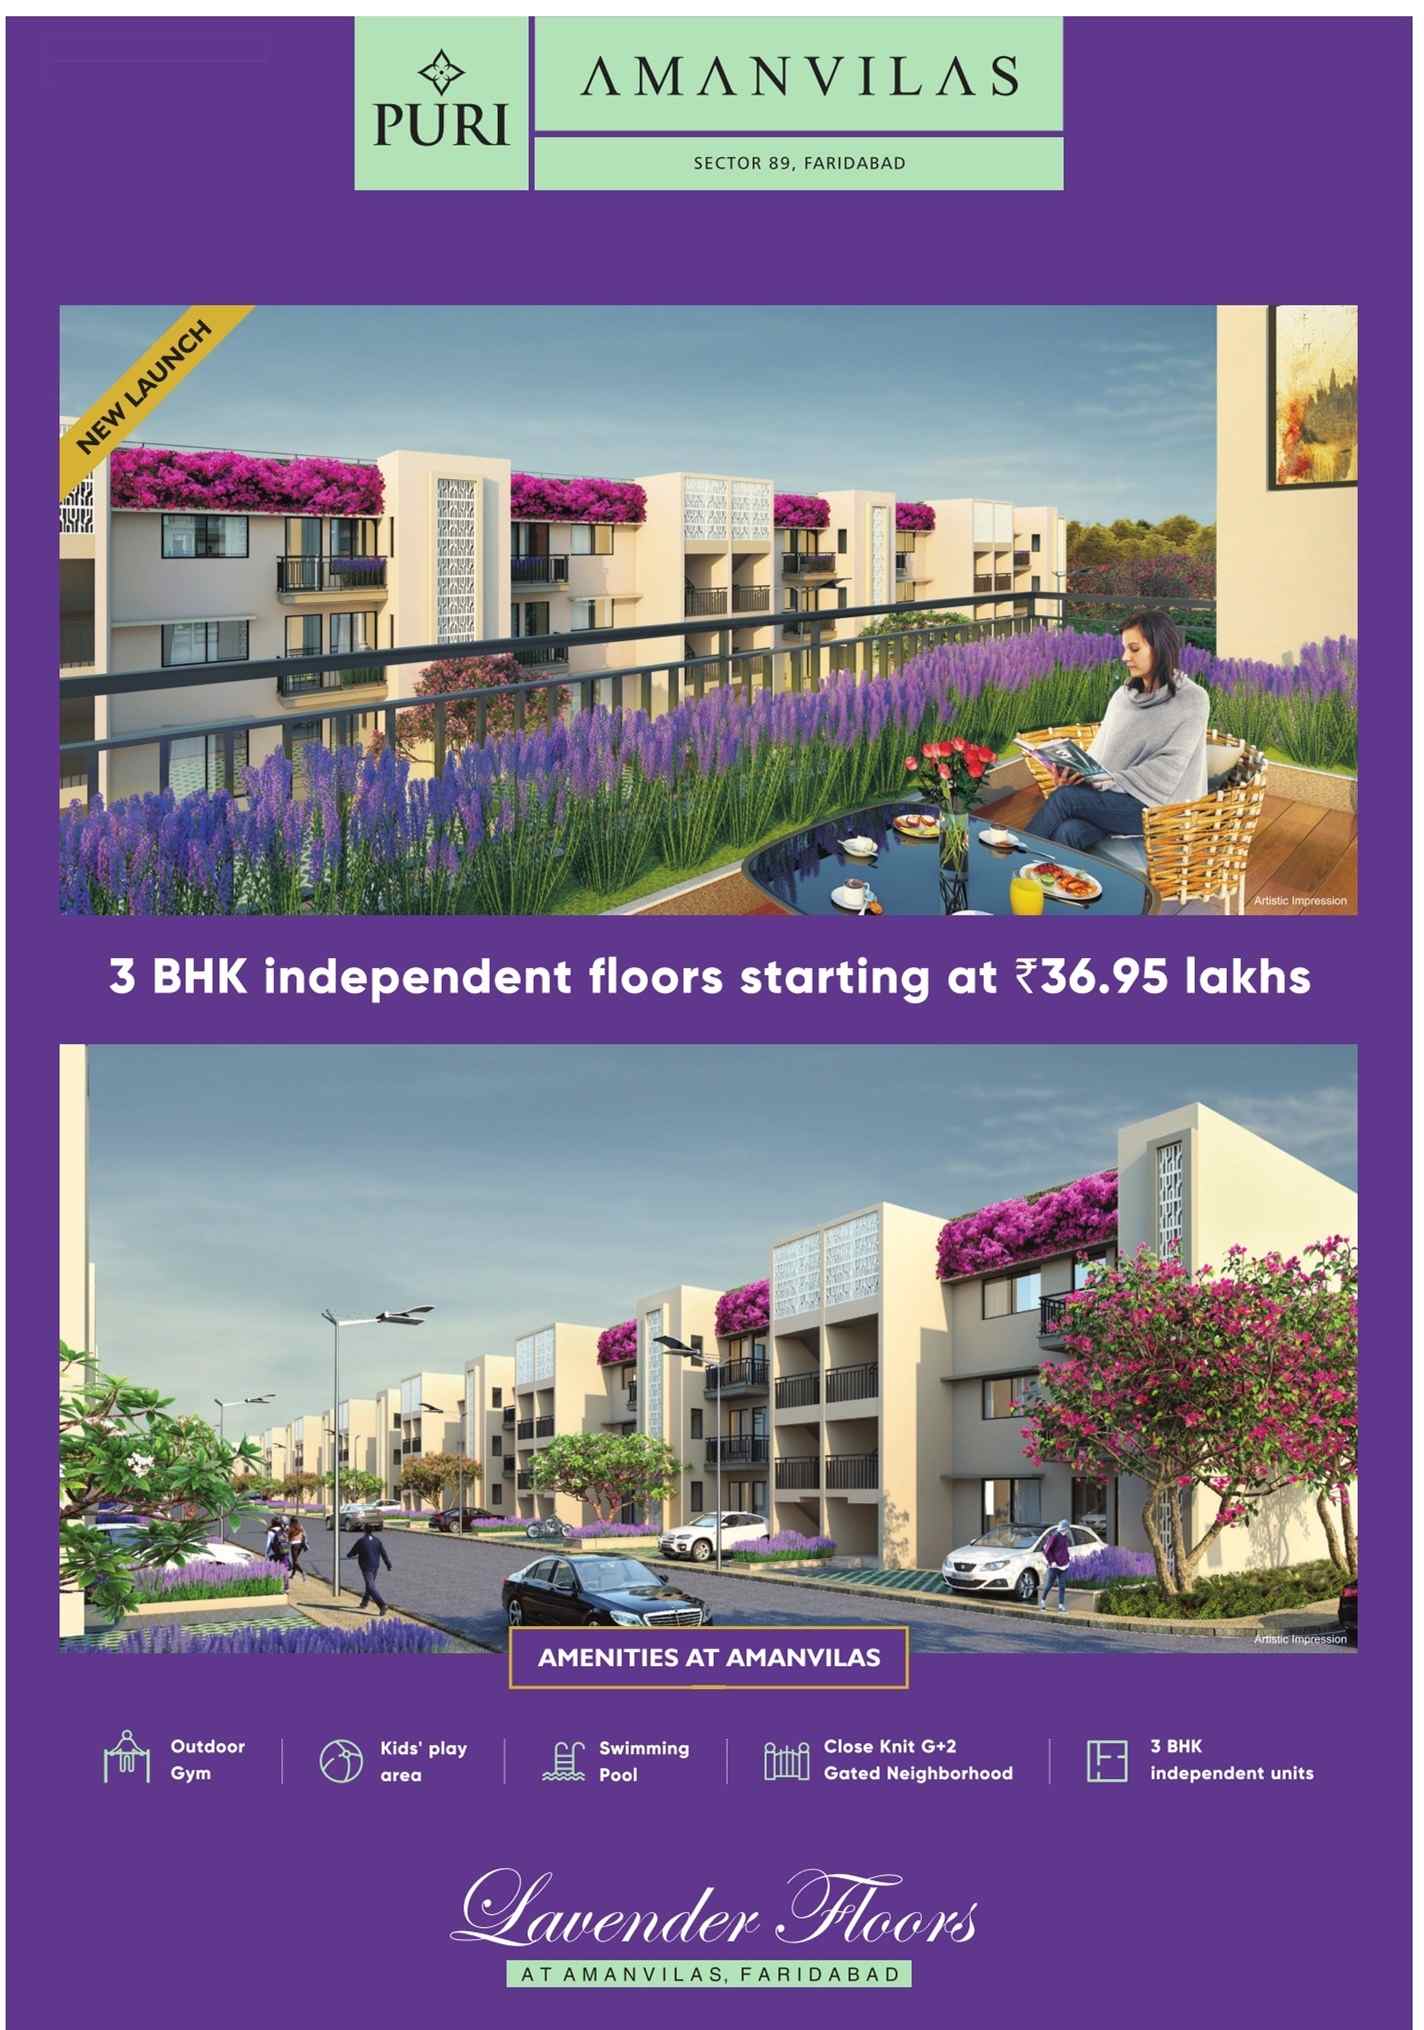 Puri Amanvilas presents 3 BHK independent floors @ Rs. 36.95 lacs in Faridabad